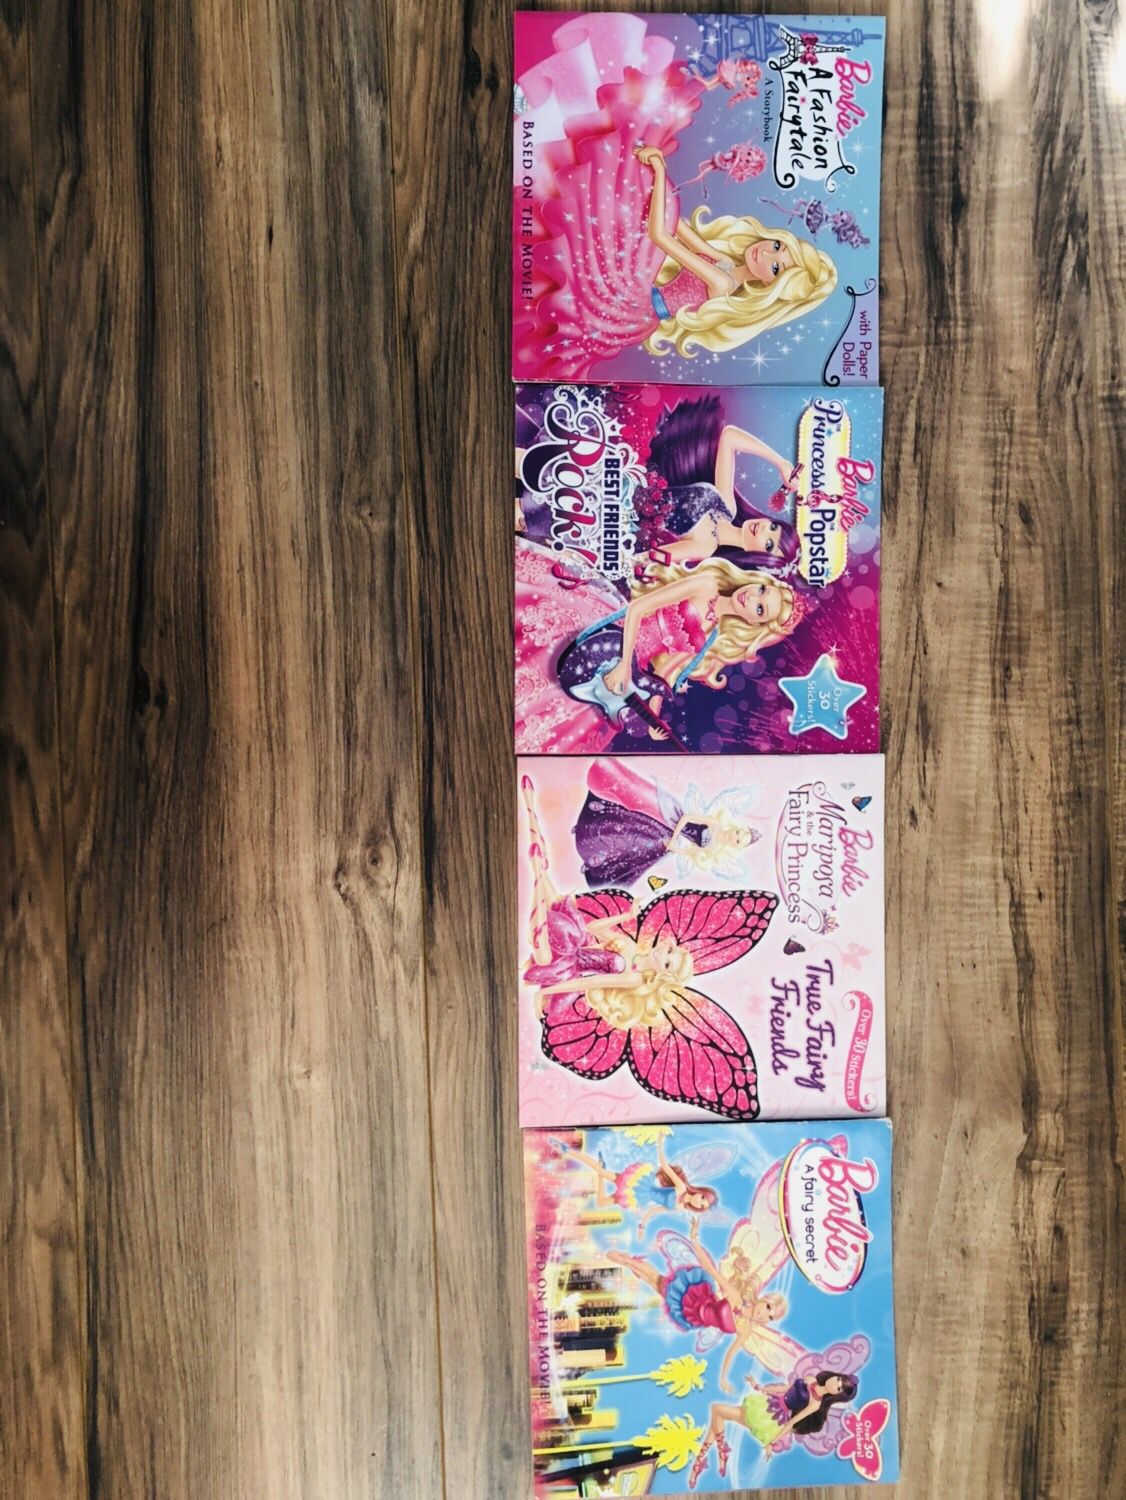 Barbie story collection